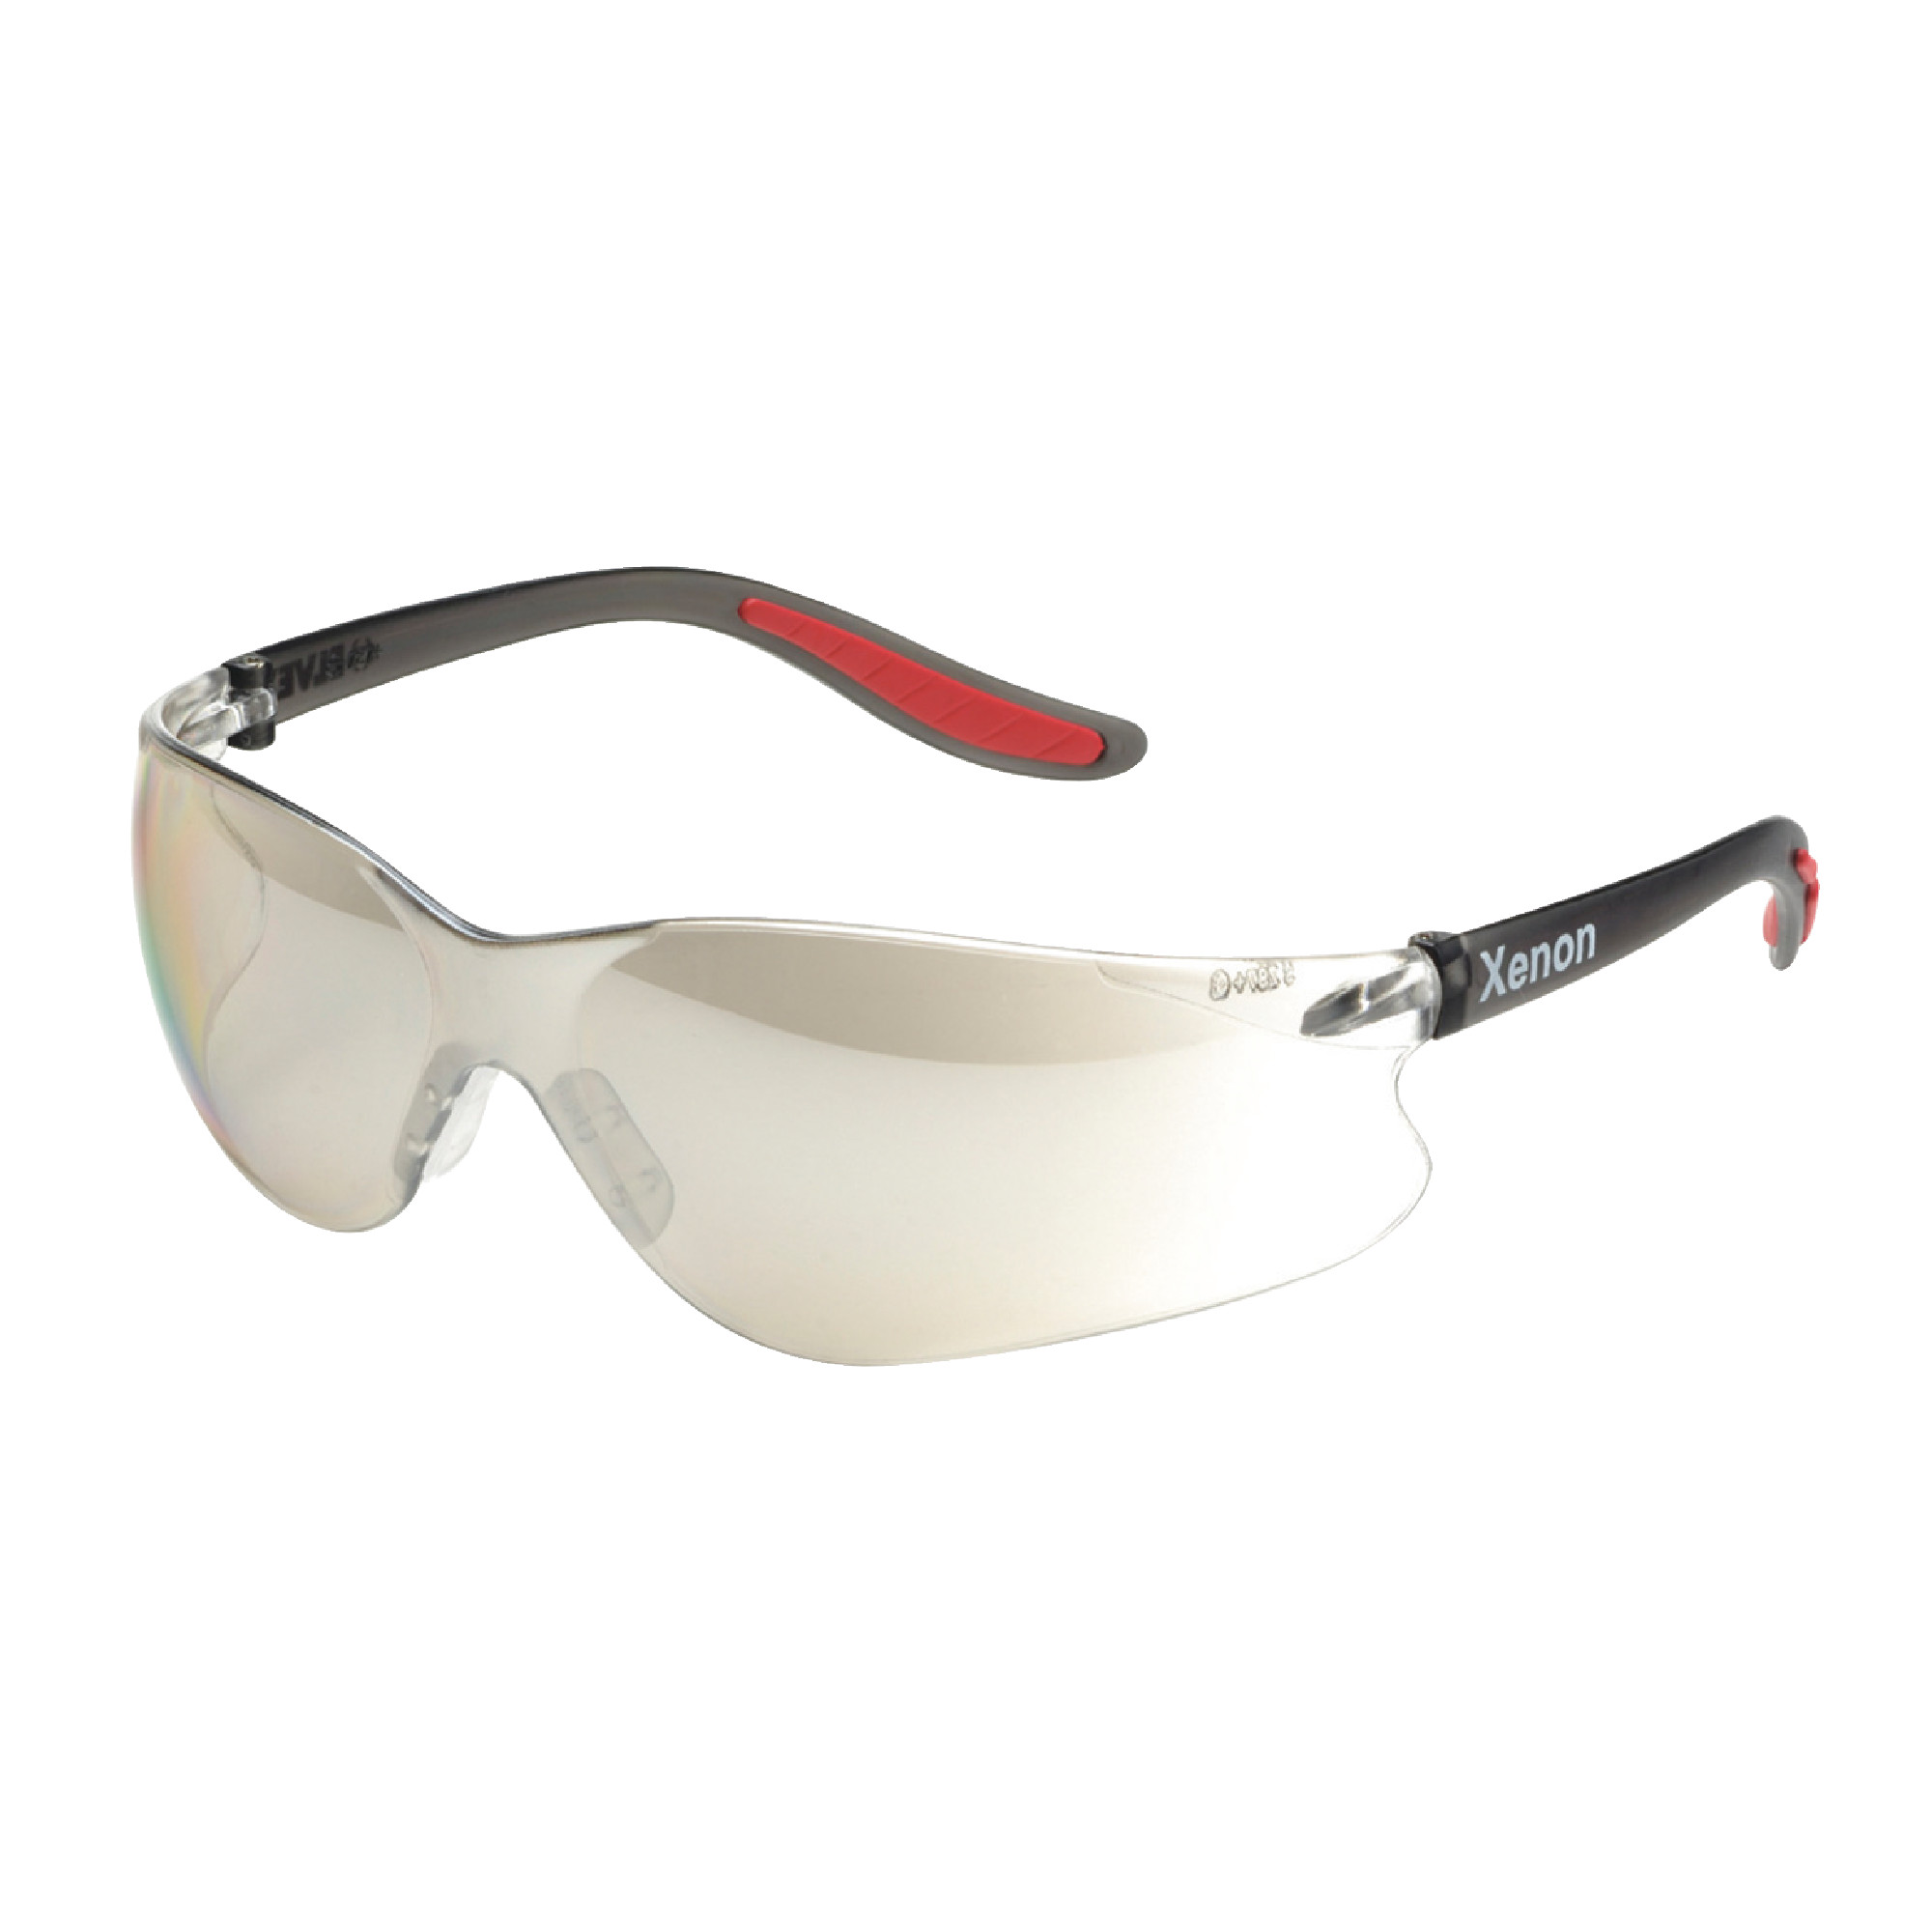 ELVEX Xenon Indoor/Outdoor Lens Safety Glasses